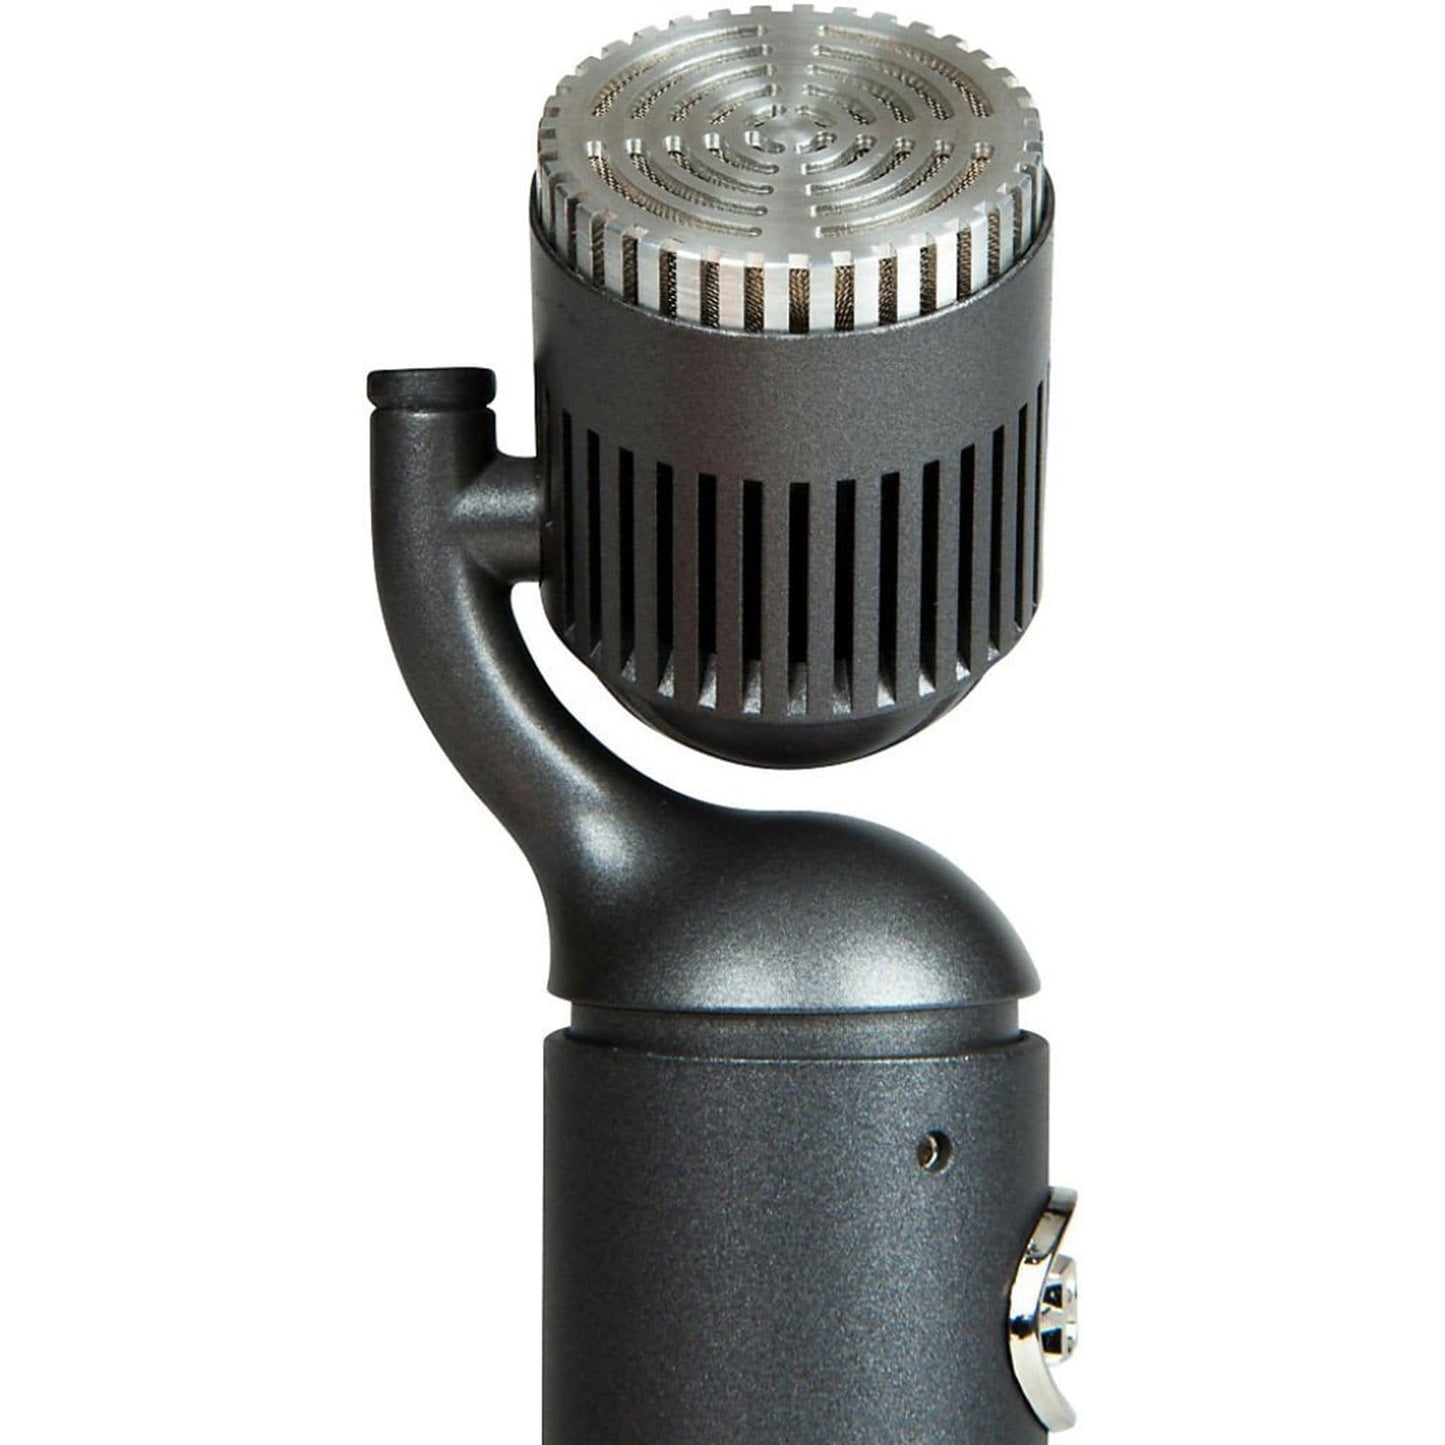 Blue Hummingbird Small Diaphragm Condenser Microphone Pair - PSSL ProSound and Stage Lighting